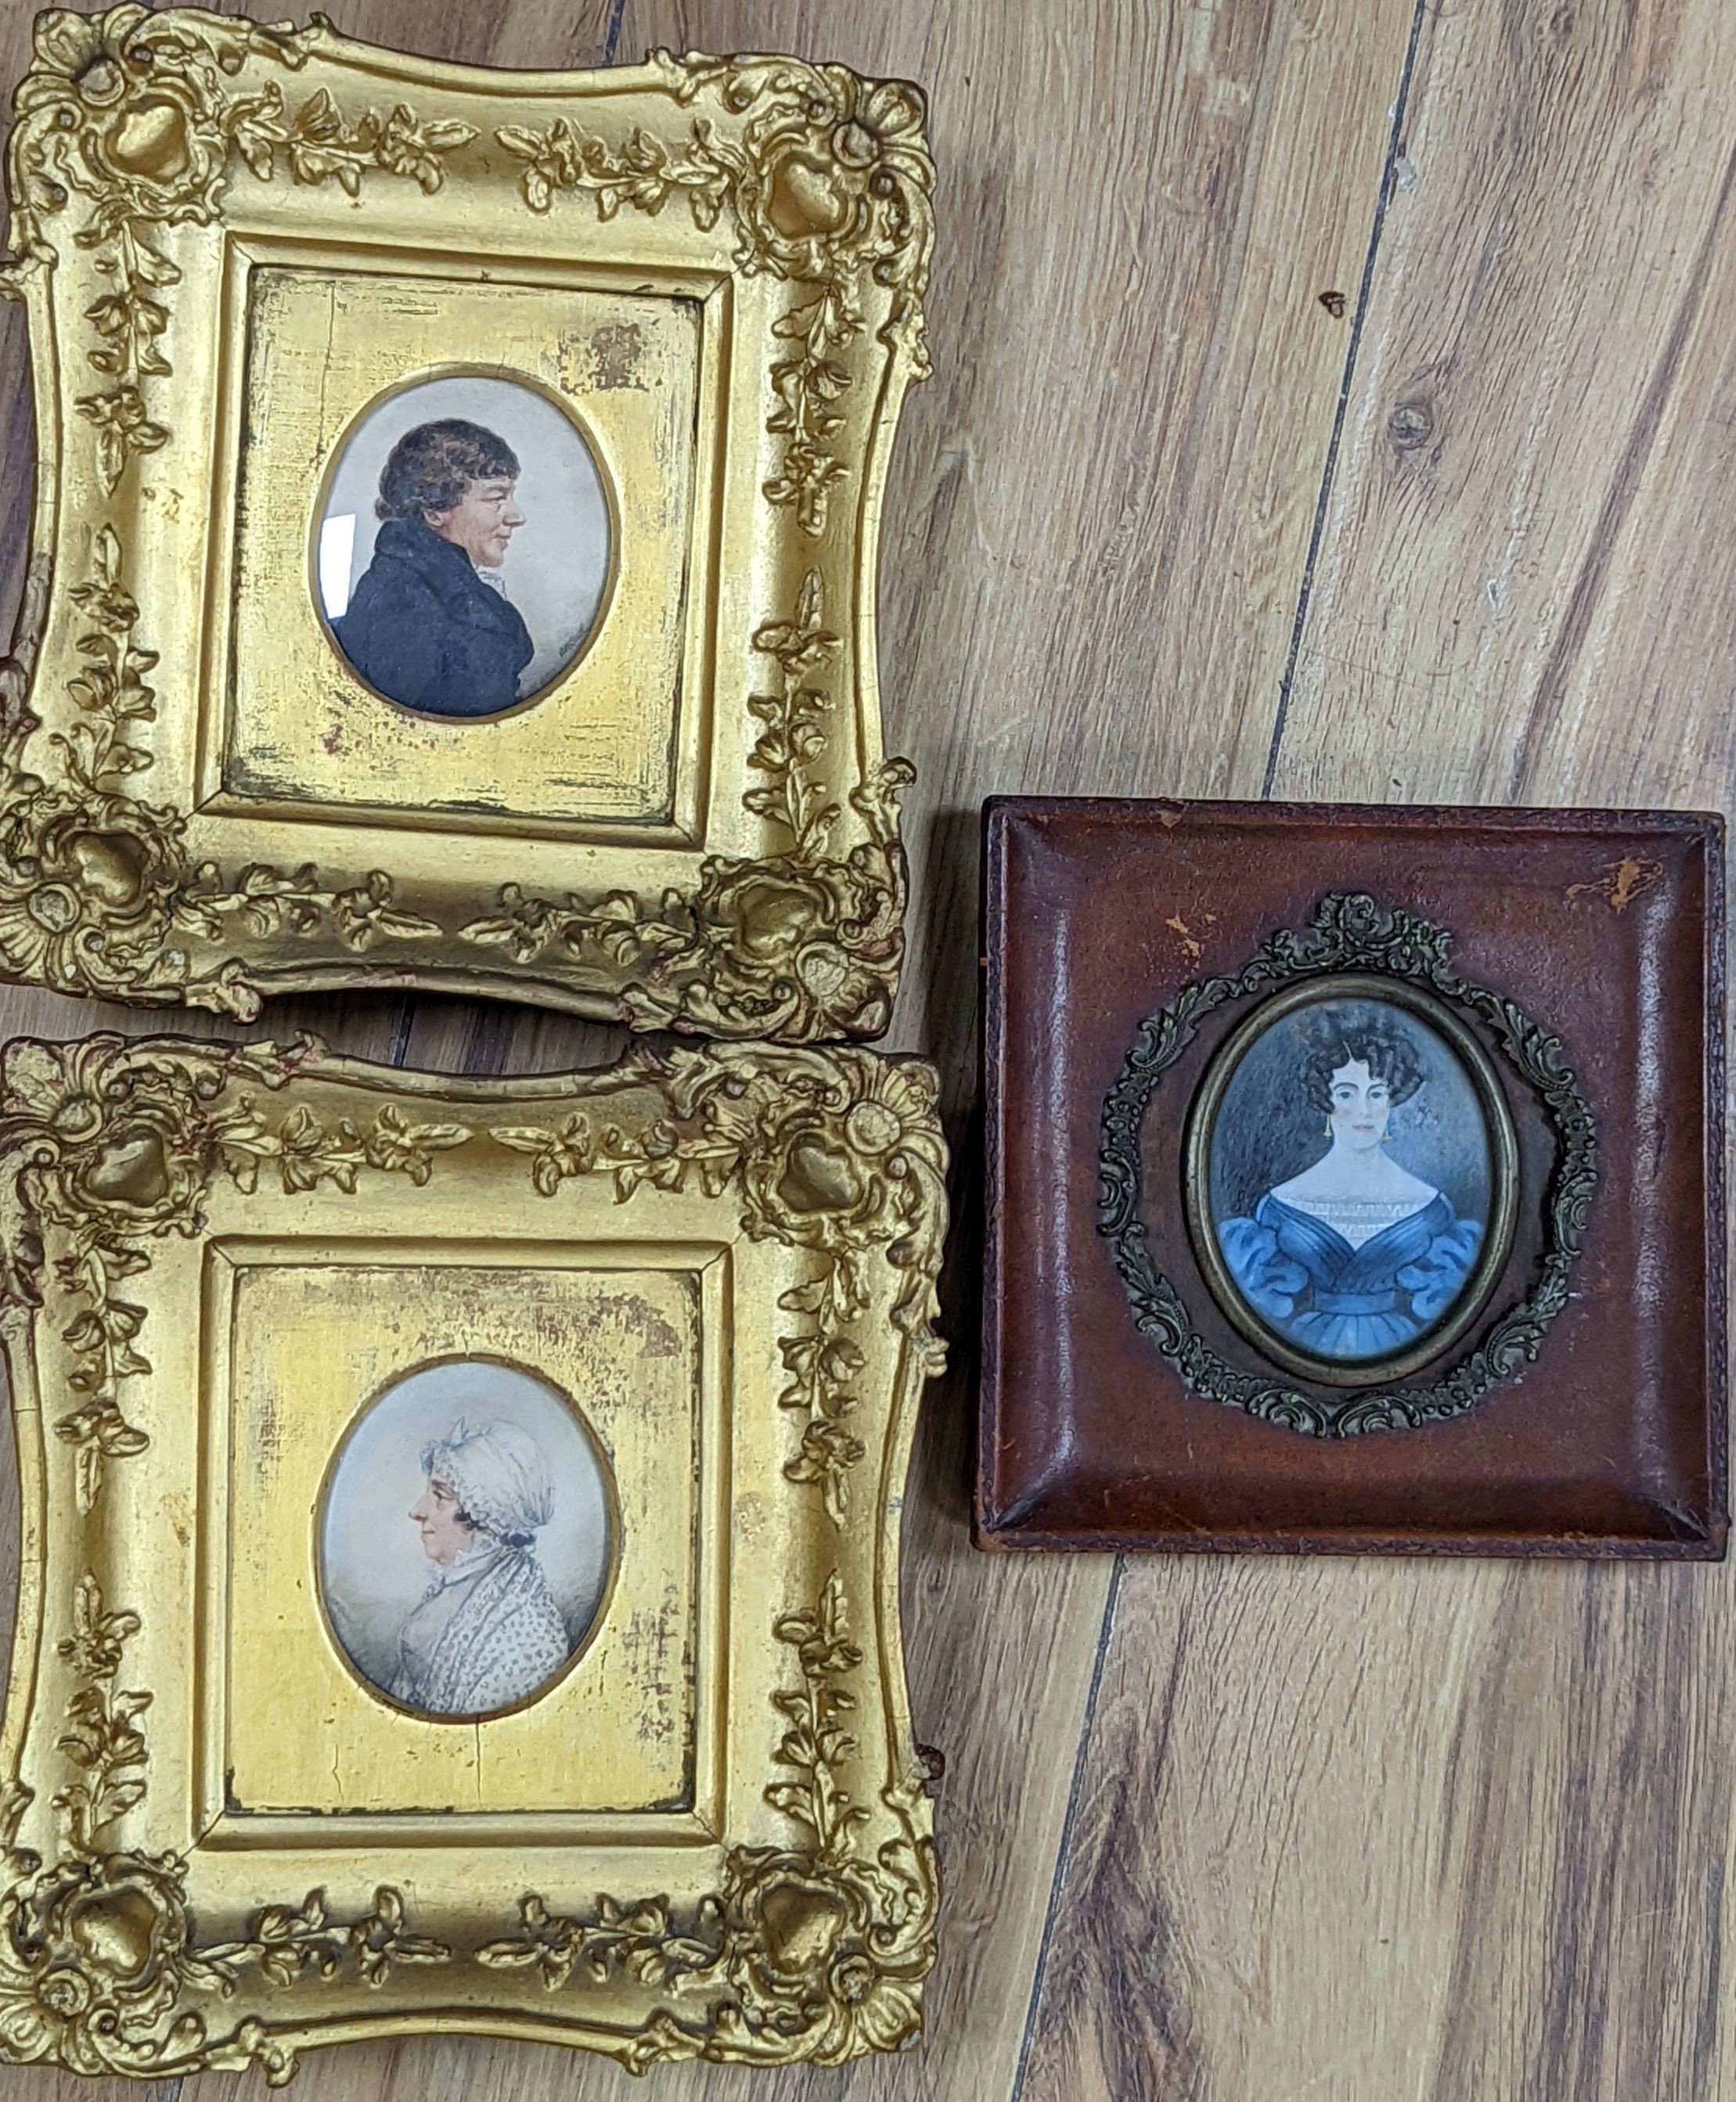 Albin Roberts Burt (1784-1842), pair of watercolour on paper miniatures, Portraits of a lady and gentleman, both signed, 6.5 x 5.5cm and an oil on ivory miniature